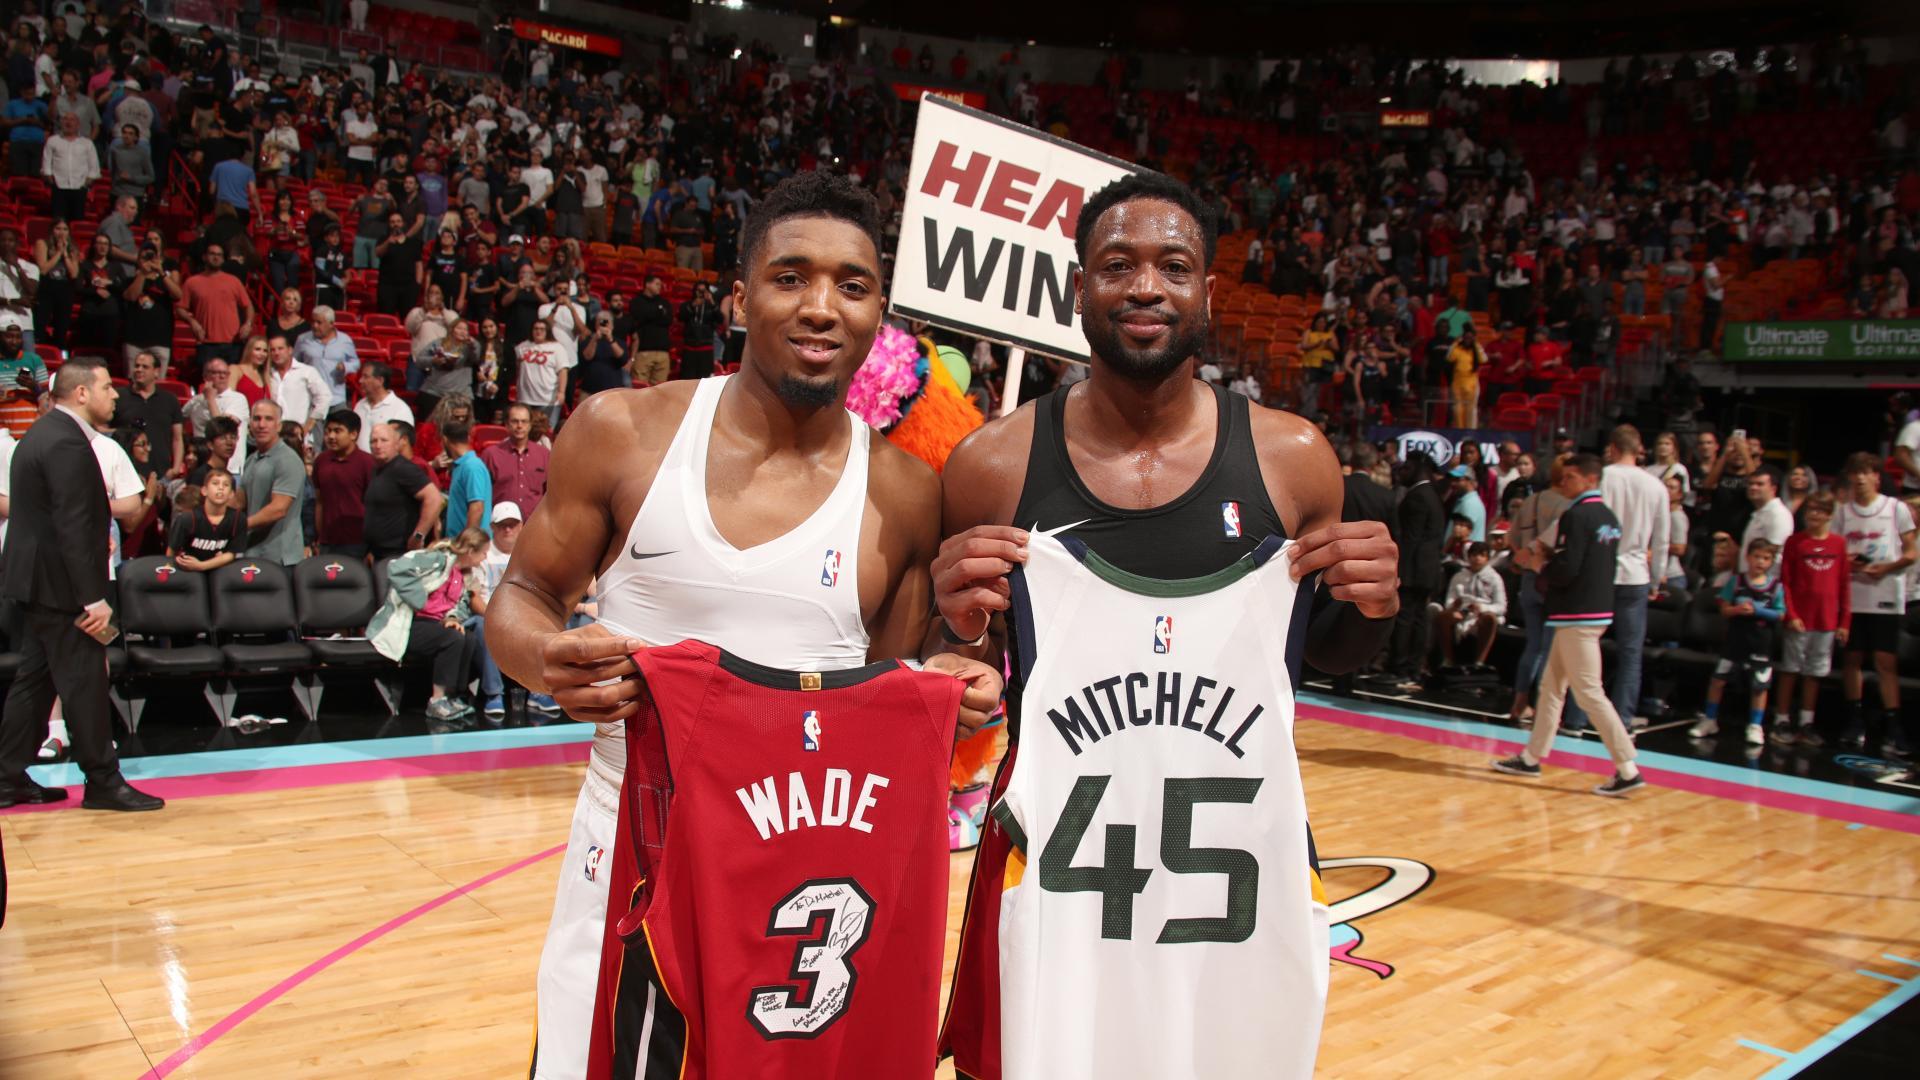 Donovan Mitchell and Dwyane Wade